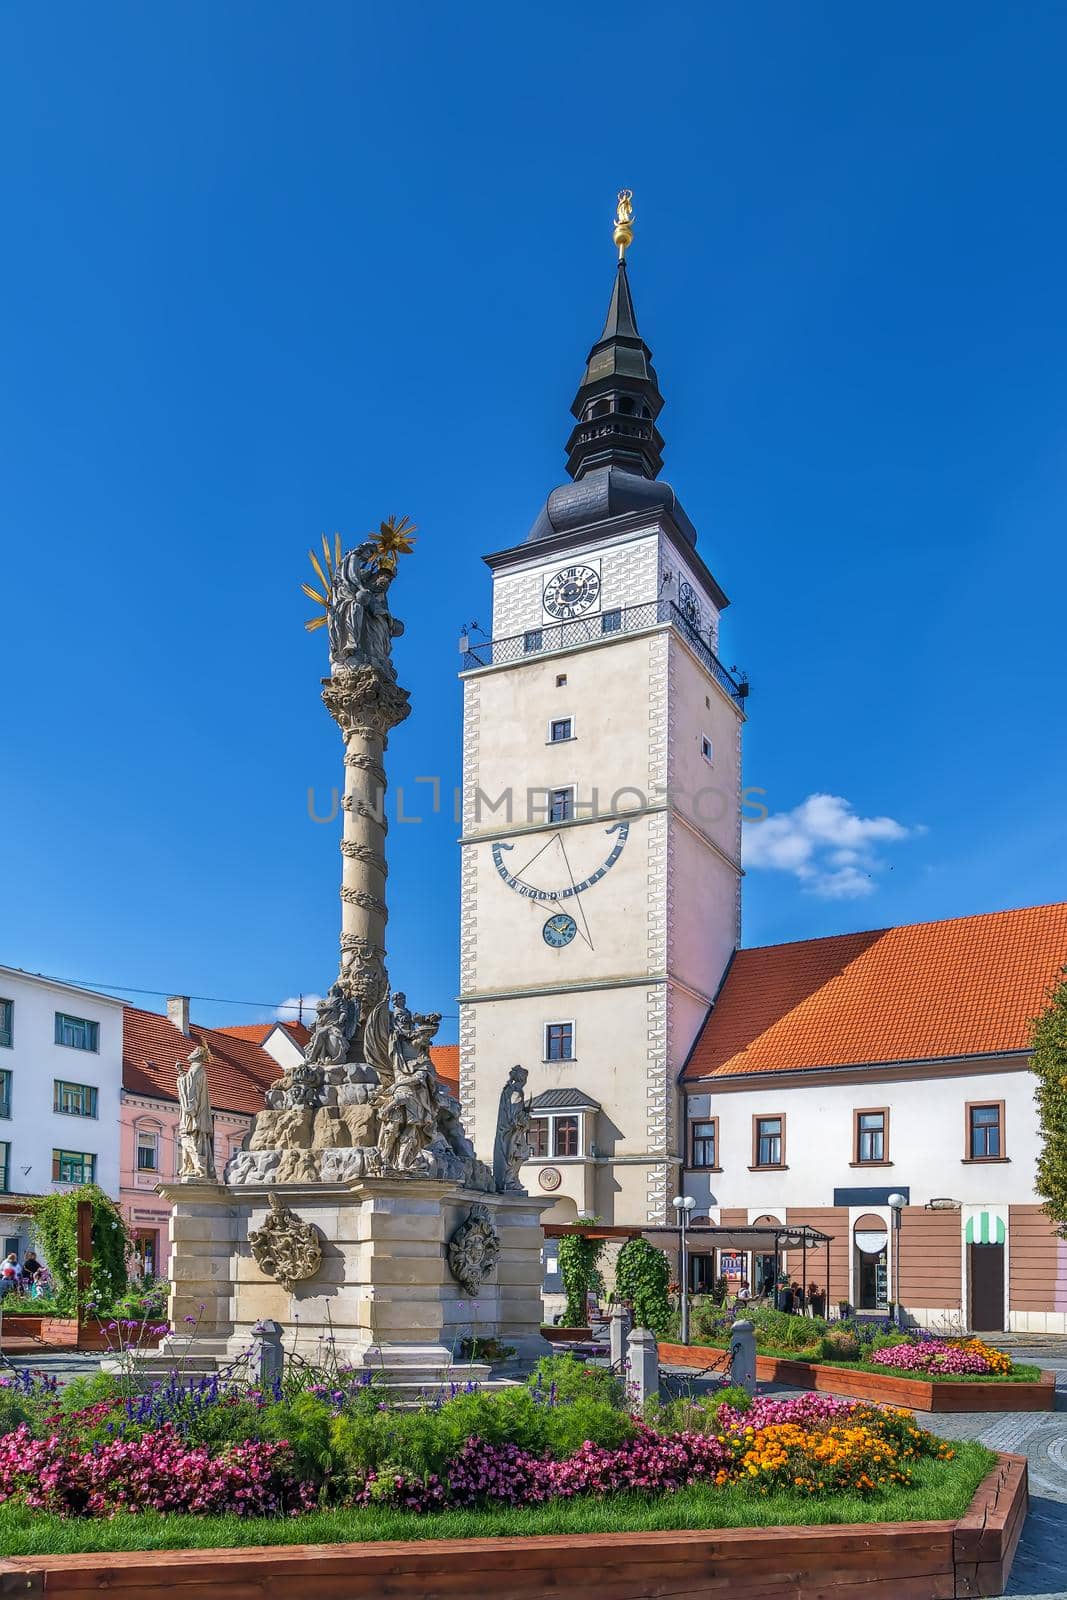 City Tower is one of the most important historic monuments of Trnava, Slovakia